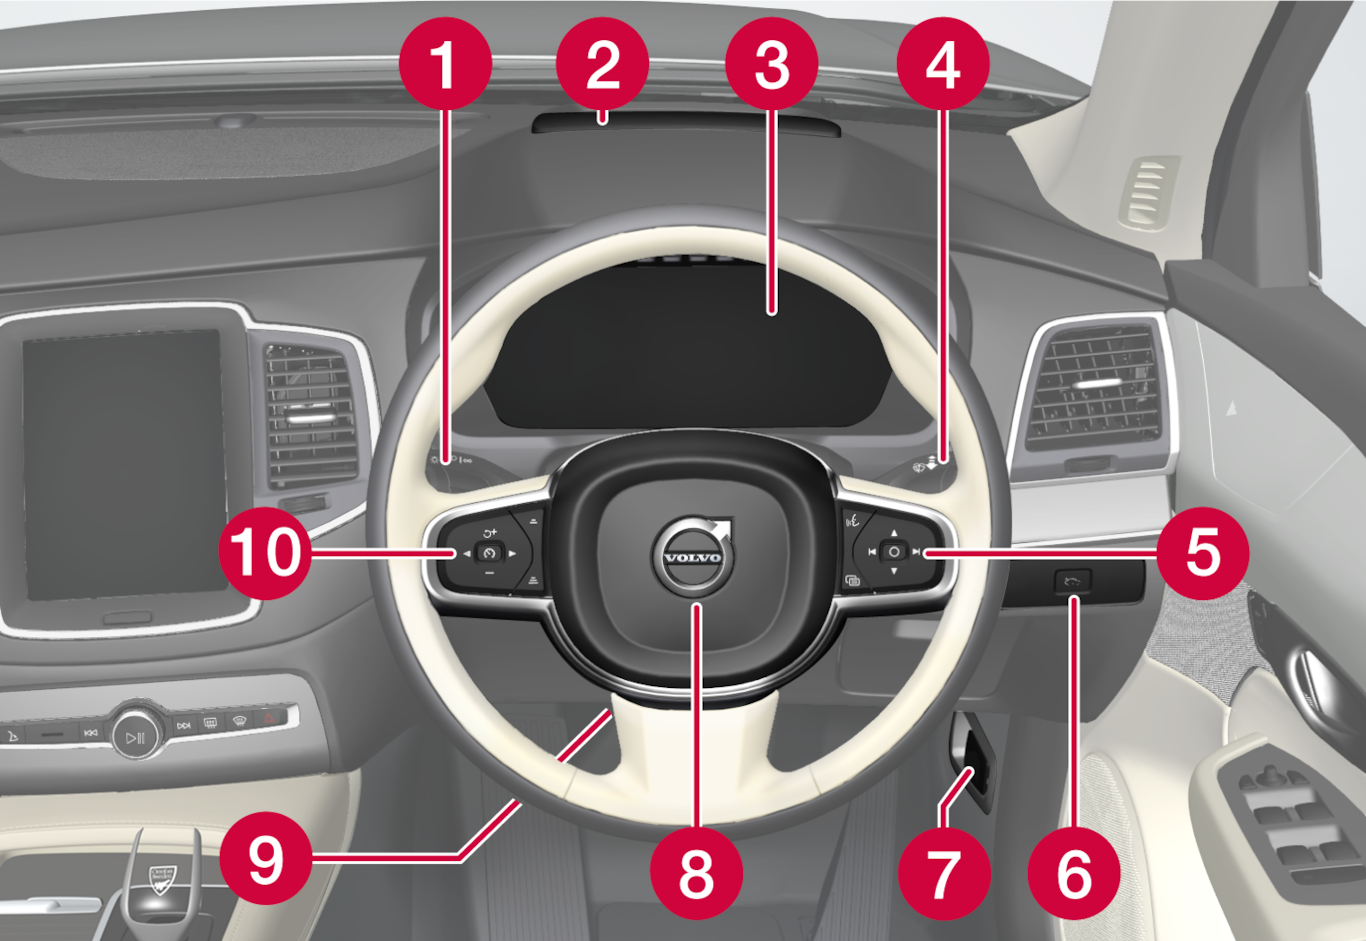 P5-XC90-22w22-Displays and controls, right hand drive